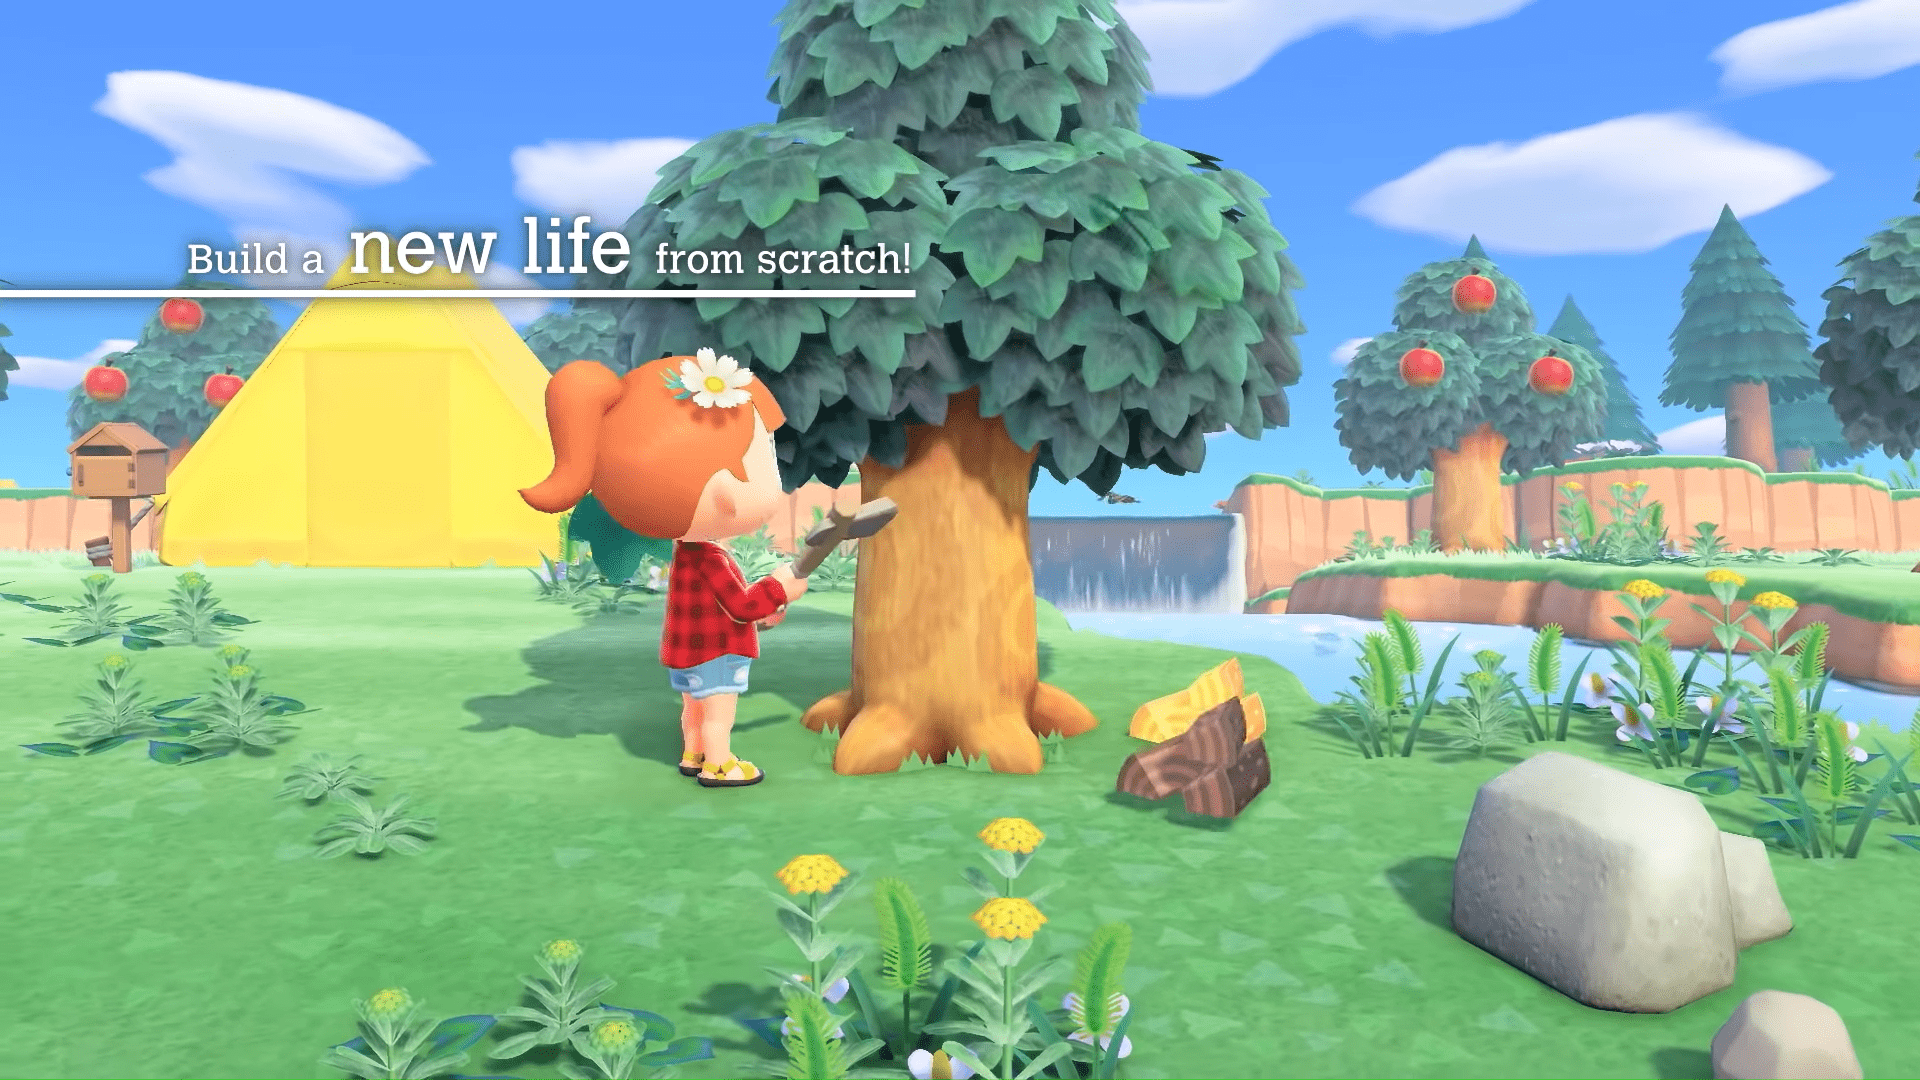 Animal Crossing: New Horizons Trailer Teases The Desert Island Getaway From Nook Inc